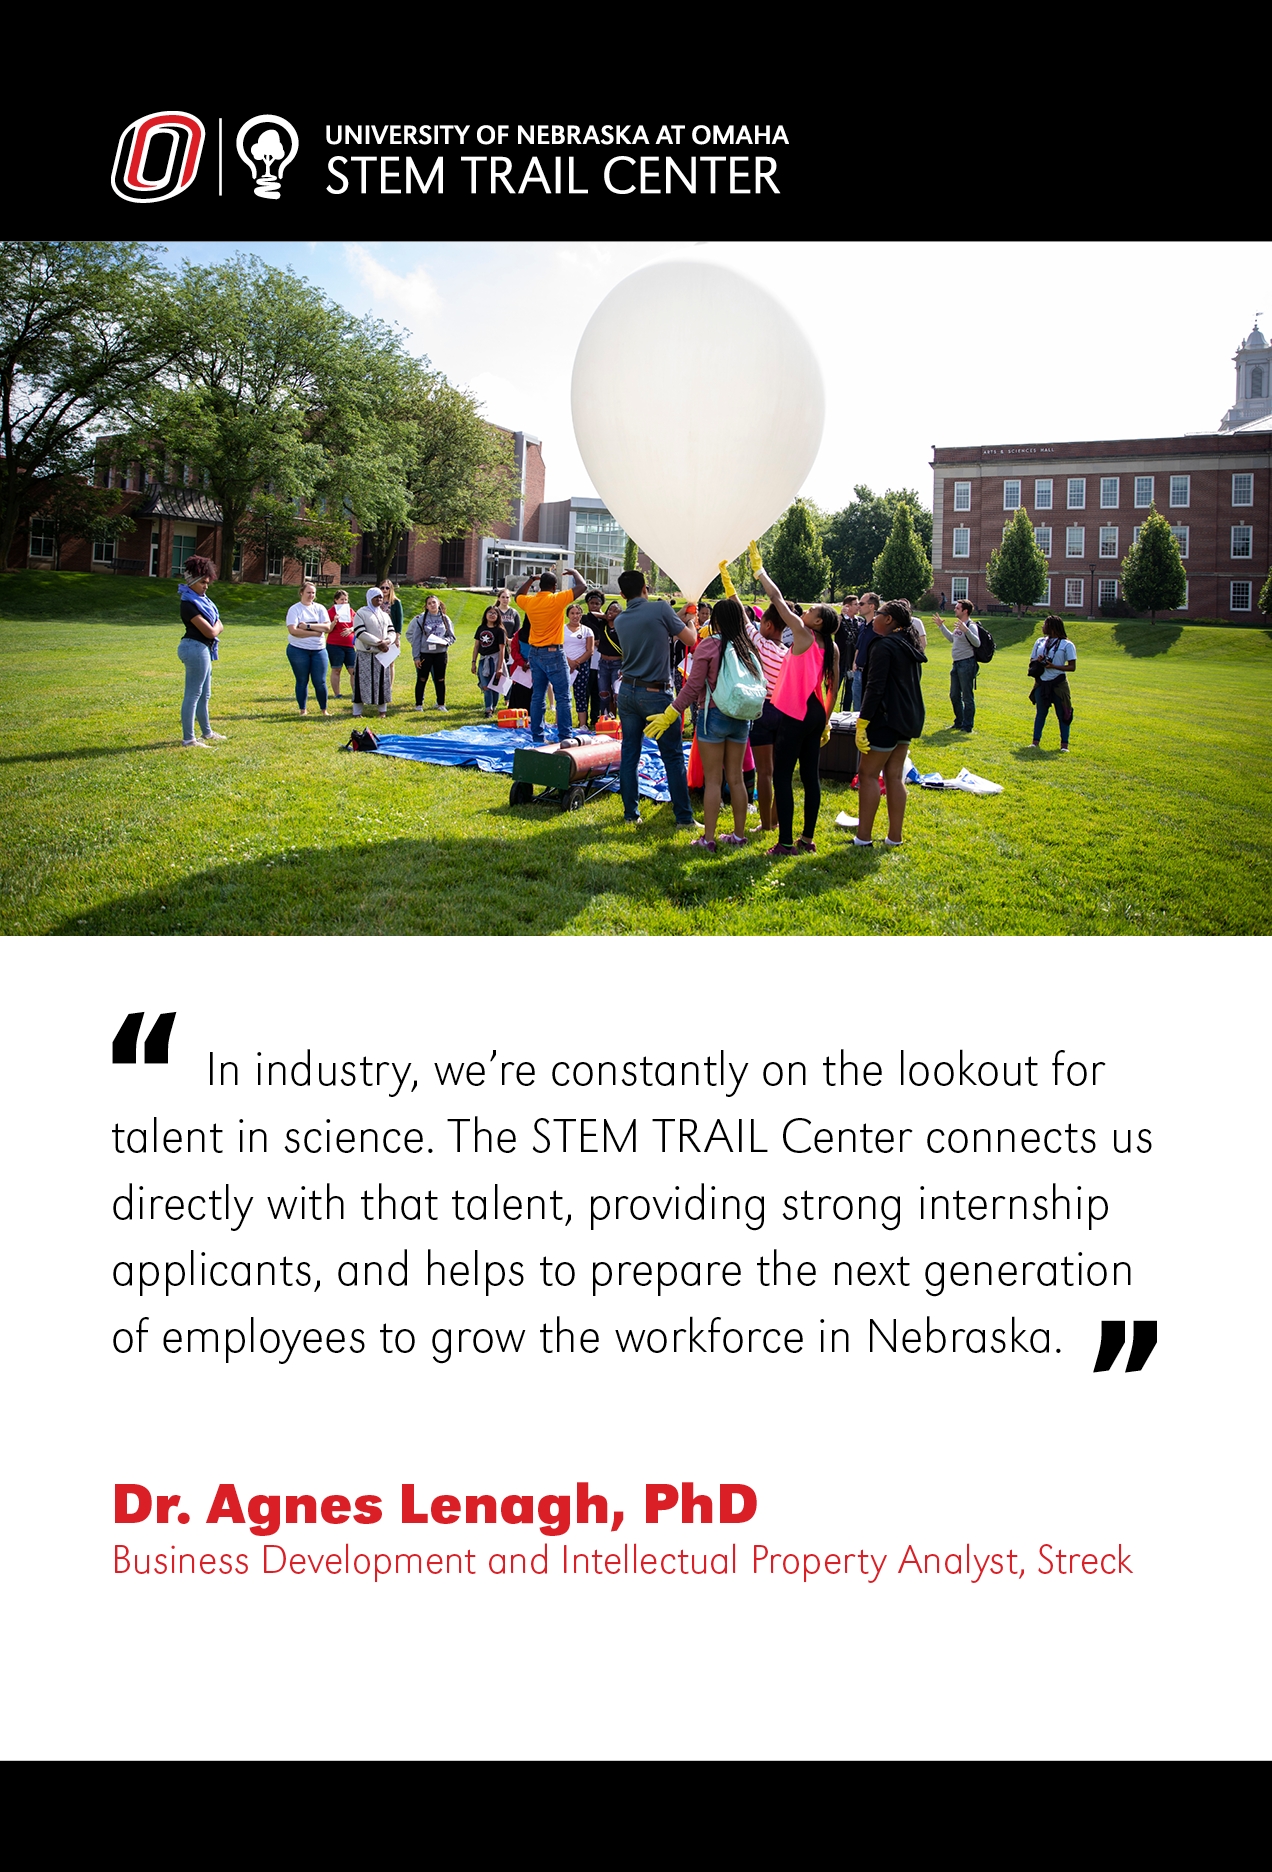 An image of students holding a large weather balloon. A quote from Dr. Agnes Lenagh